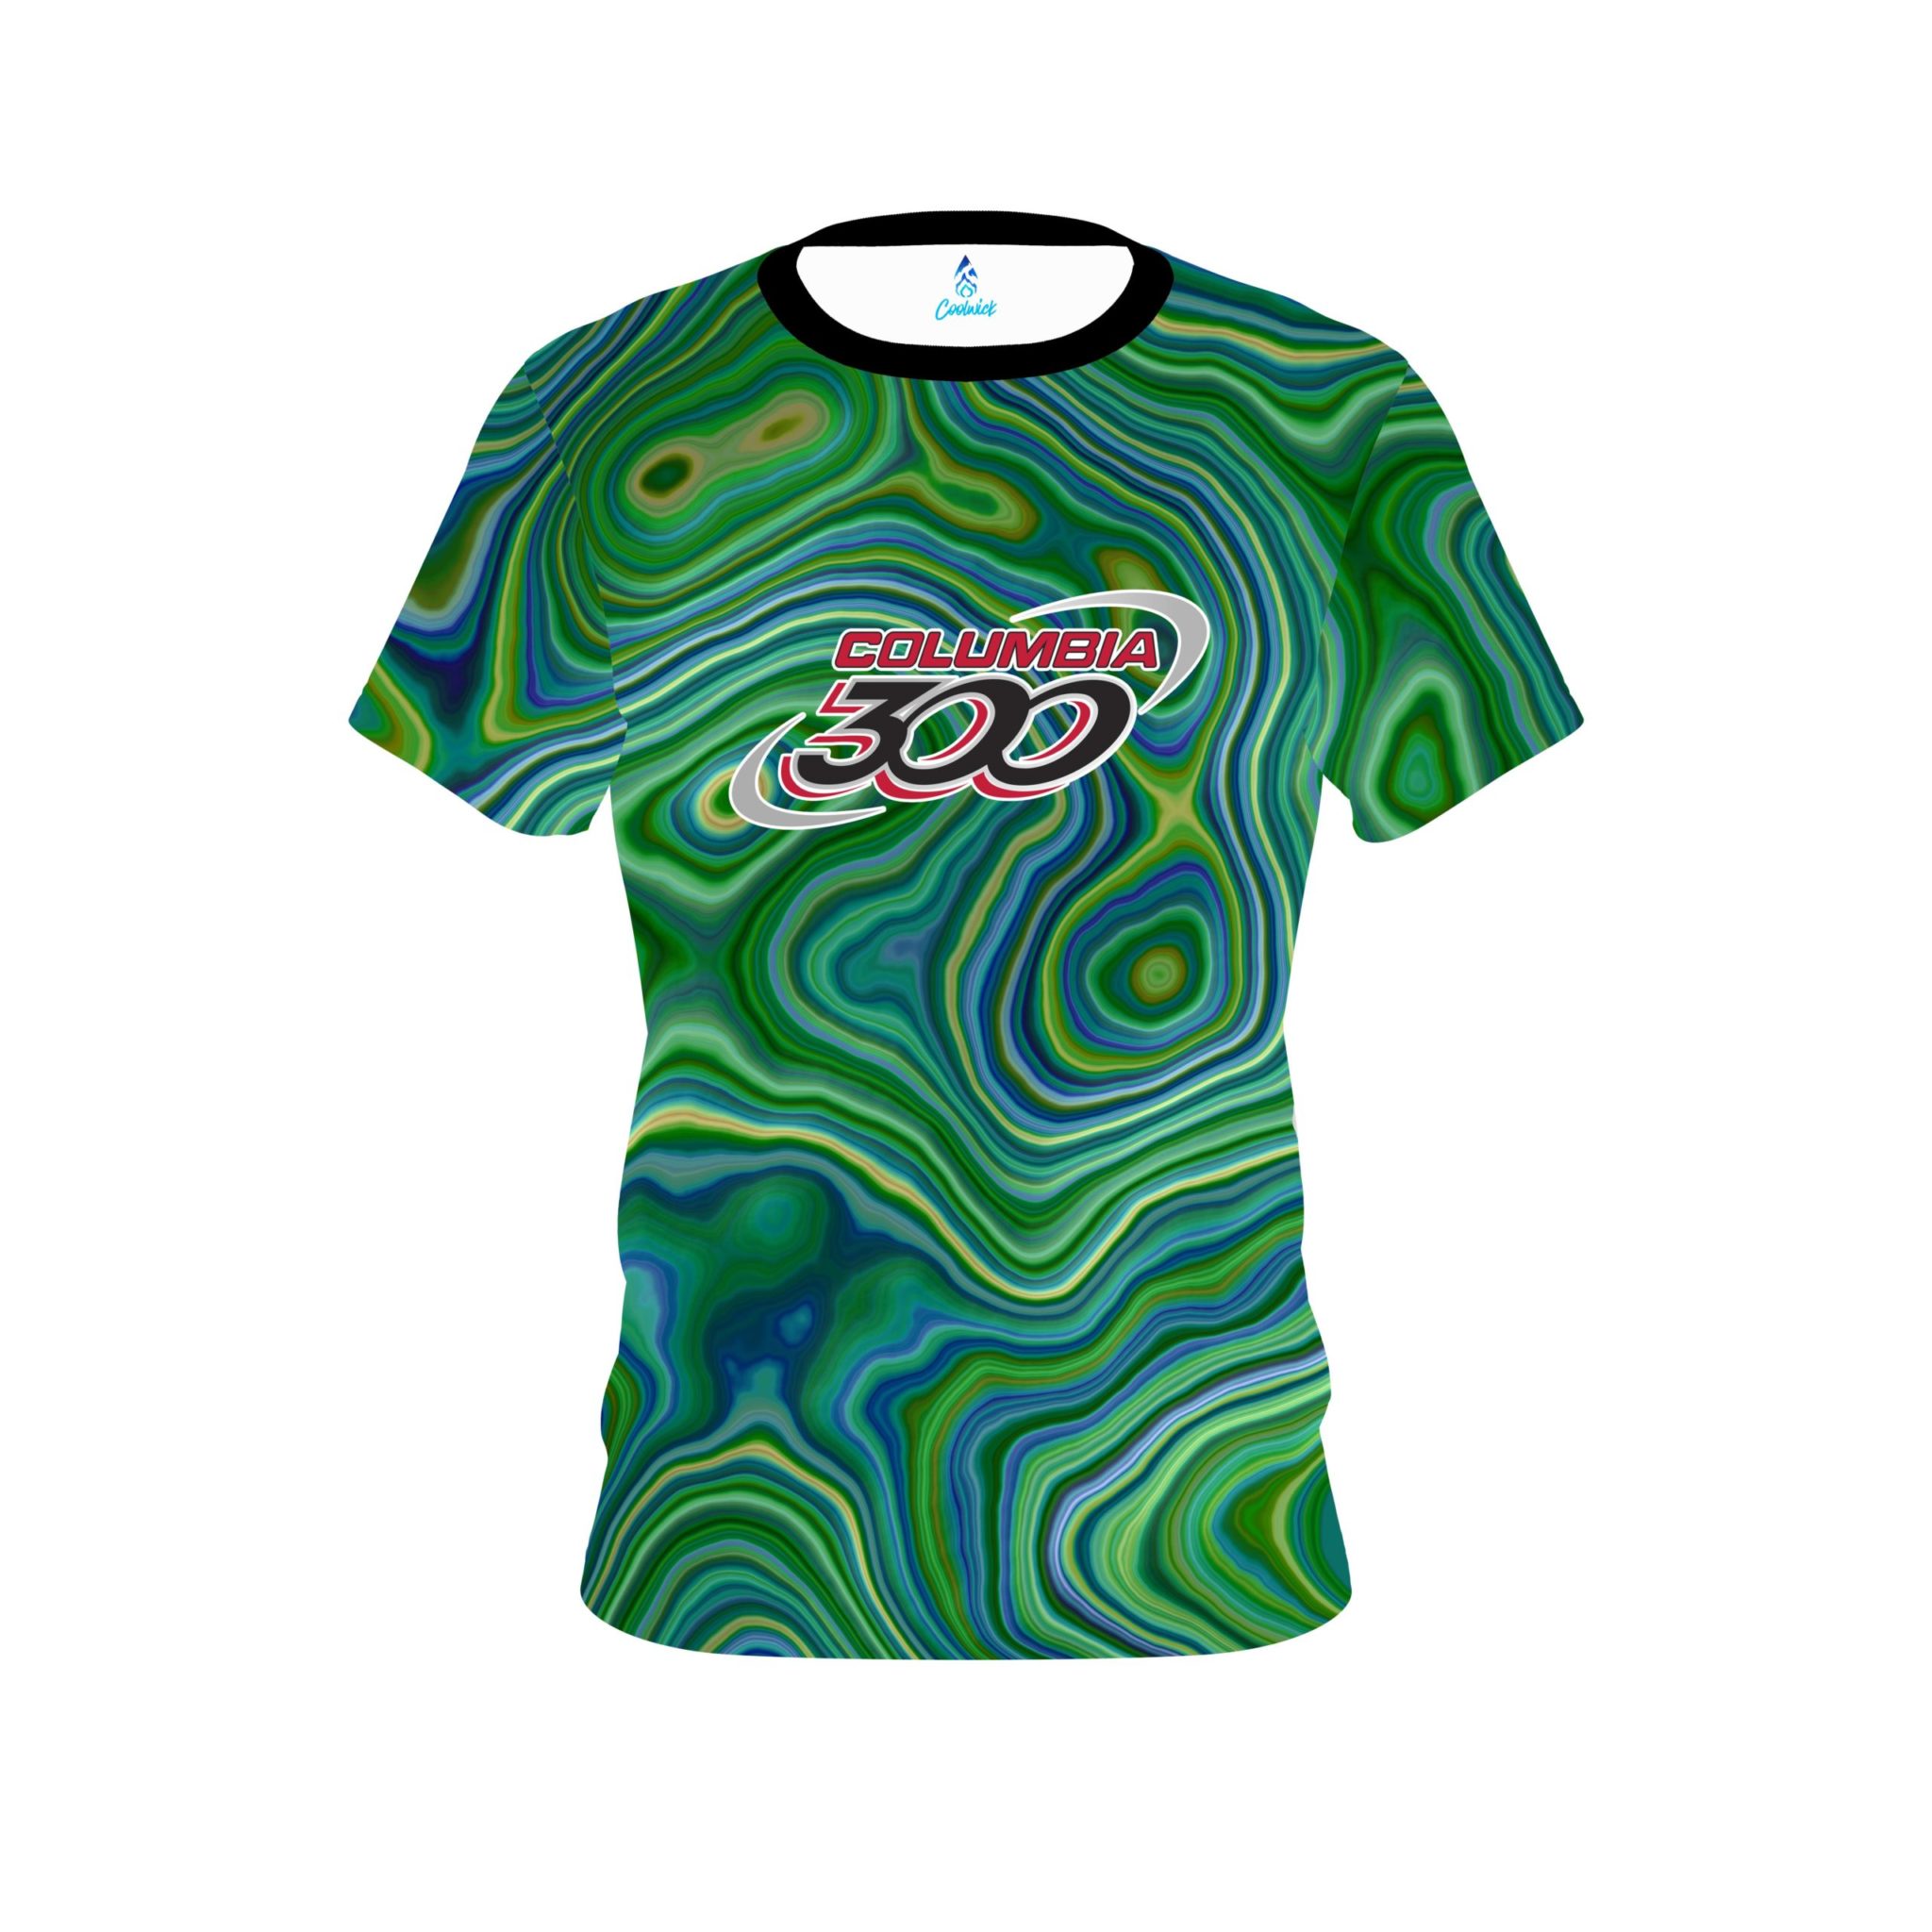 Columbia 300 Green Hallucinate CoolWick Bowling Jersey